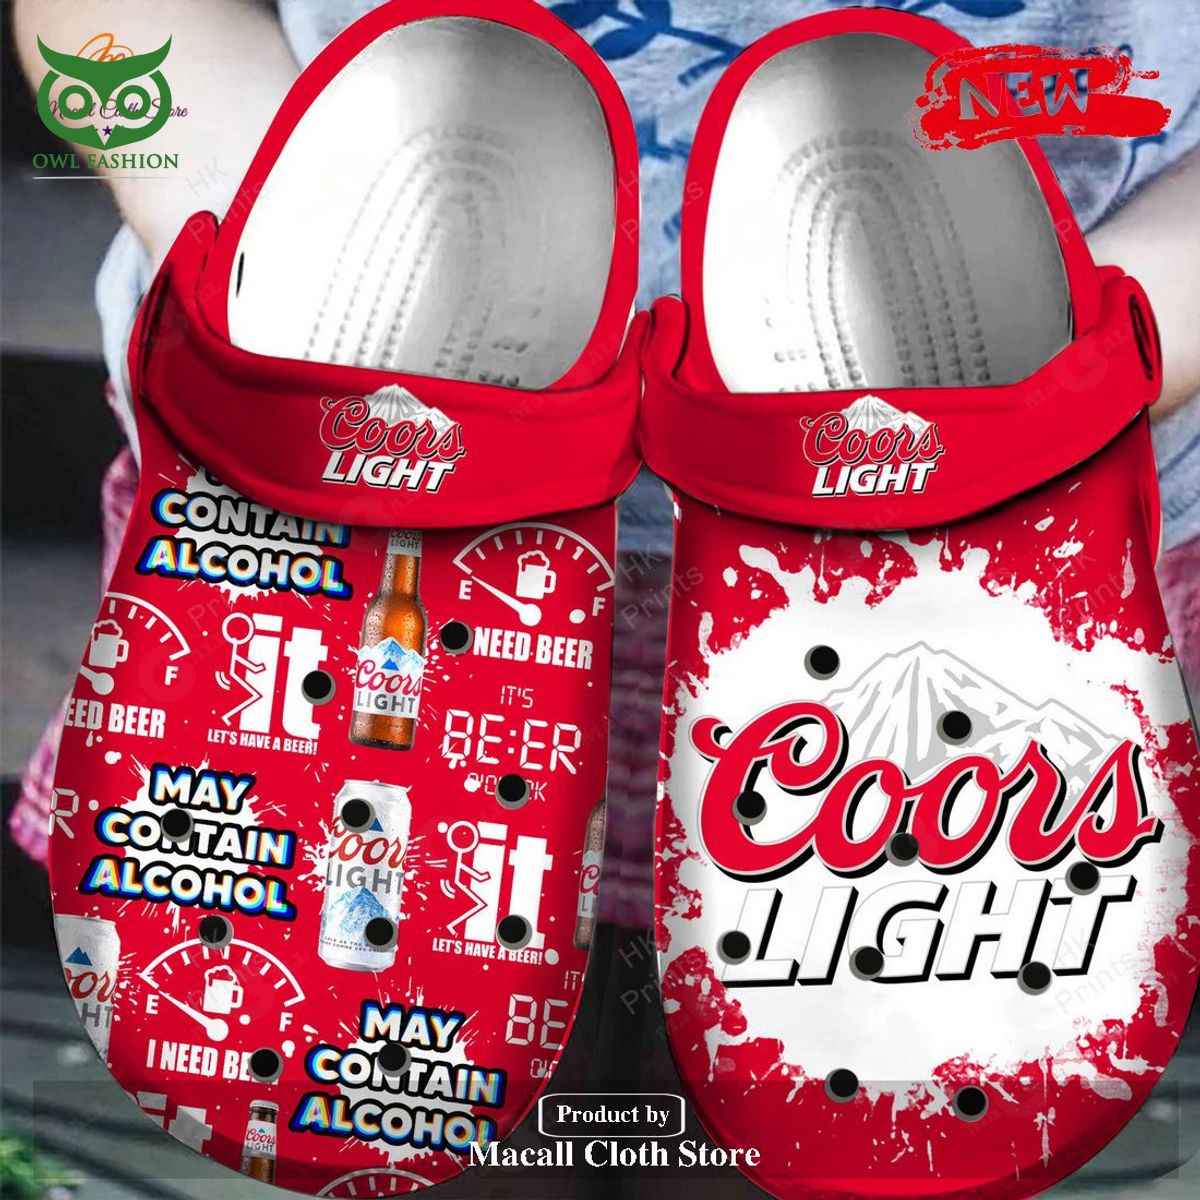 Coors Light Hot Beer Brand Crocs Clog Such a charming picture.